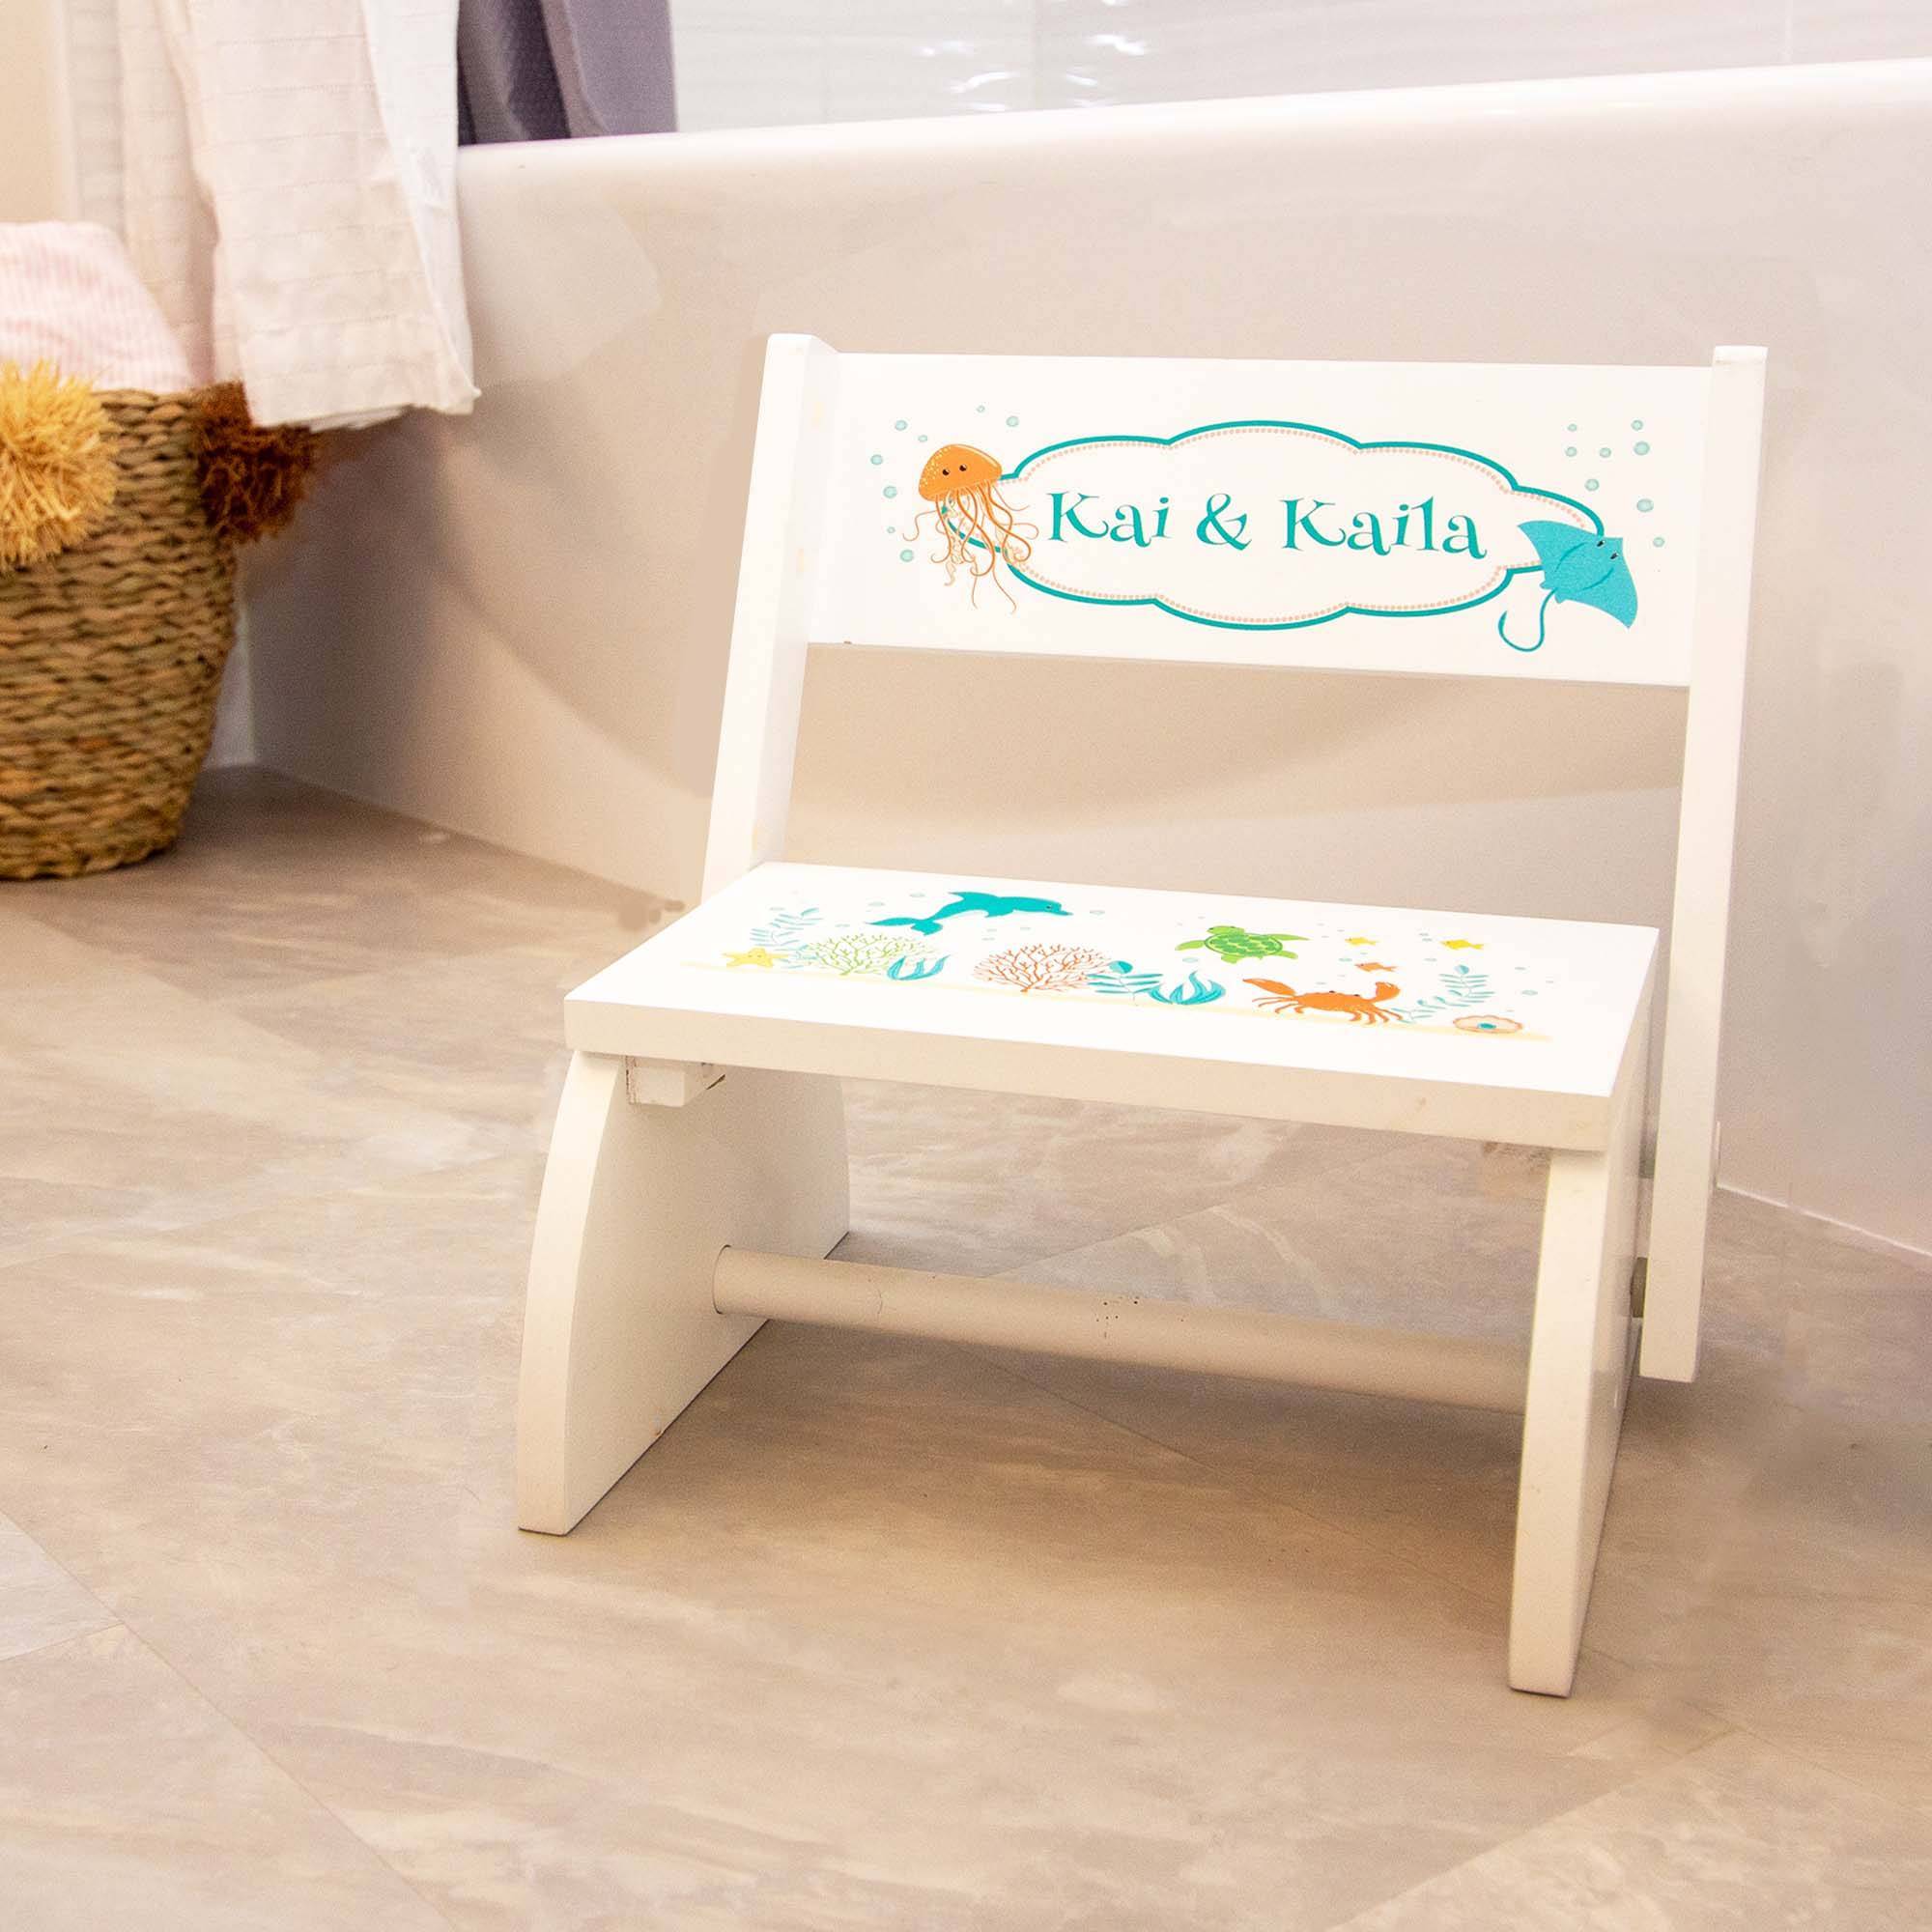 childs personalized bench seat